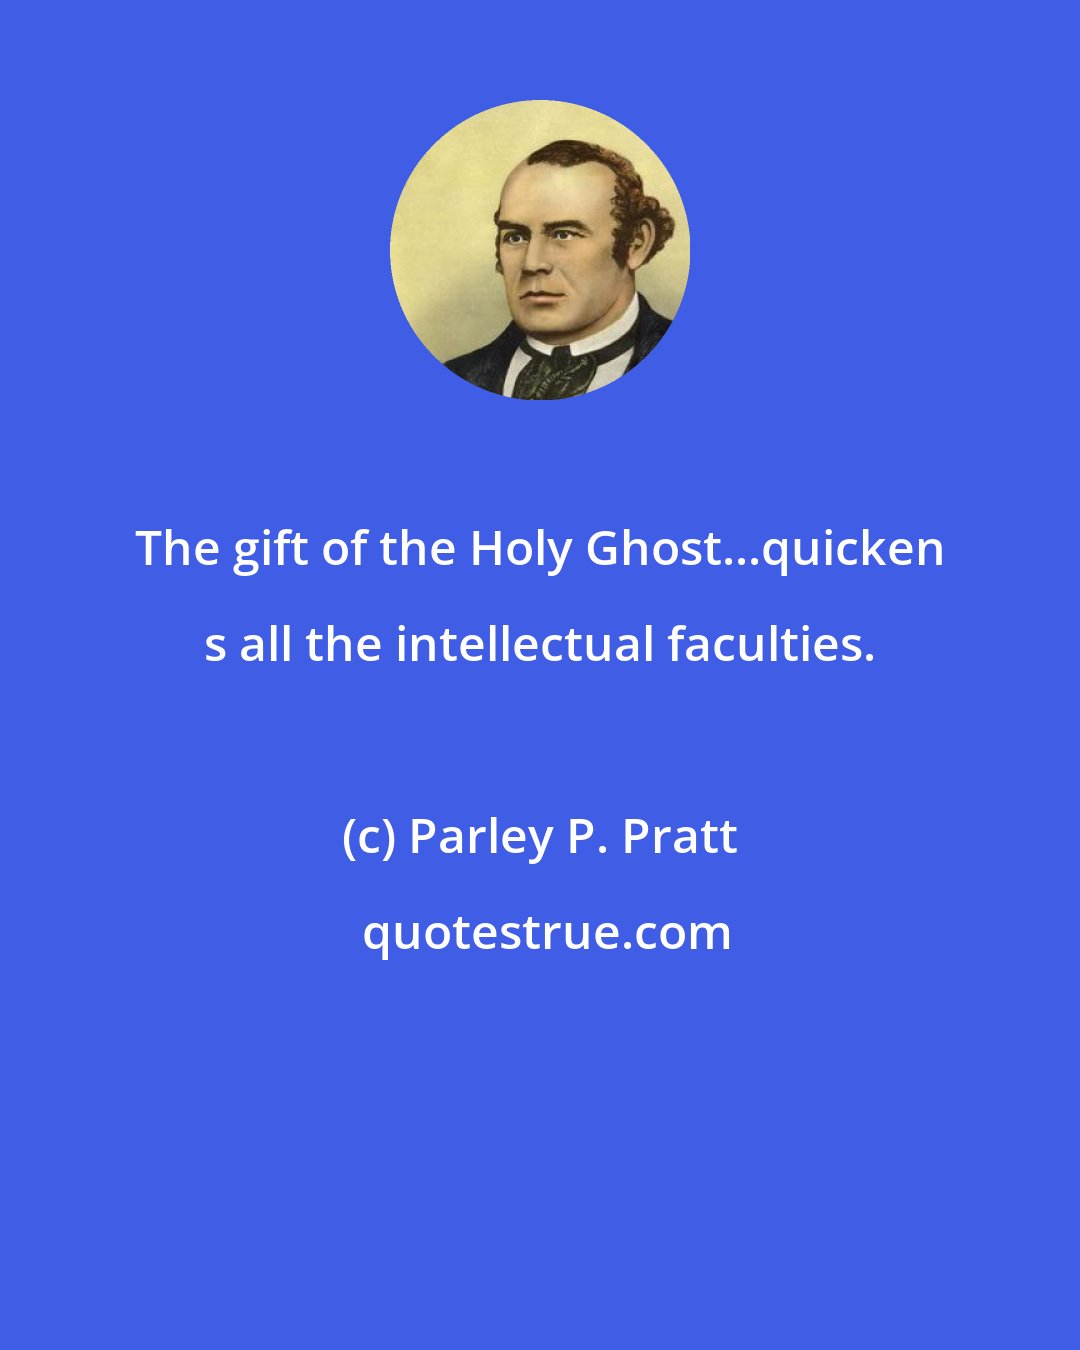 Parley P. Pratt: The gift of the Holy Ghost...quicken s all the intellectual faculties.